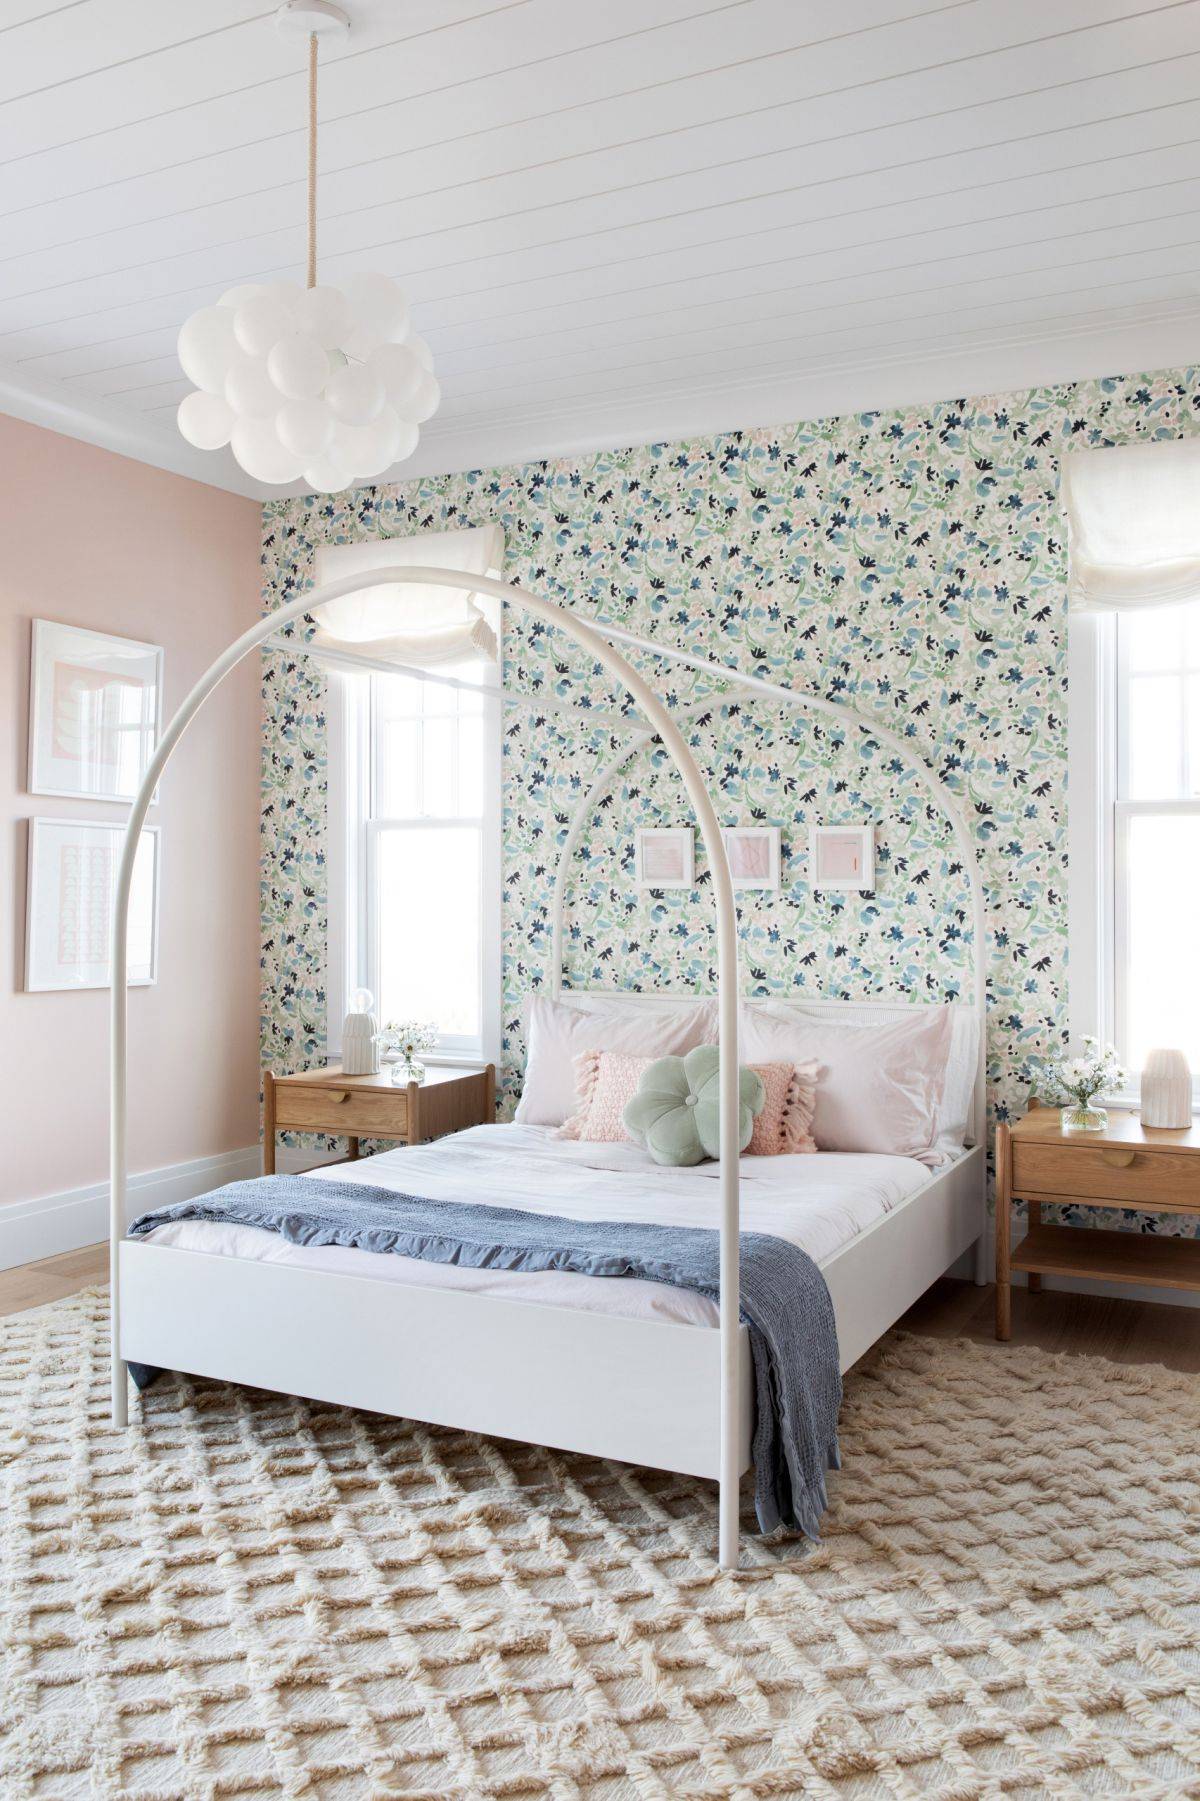 Find the right wallaper for the bedroom in need of a leafy backdrop!